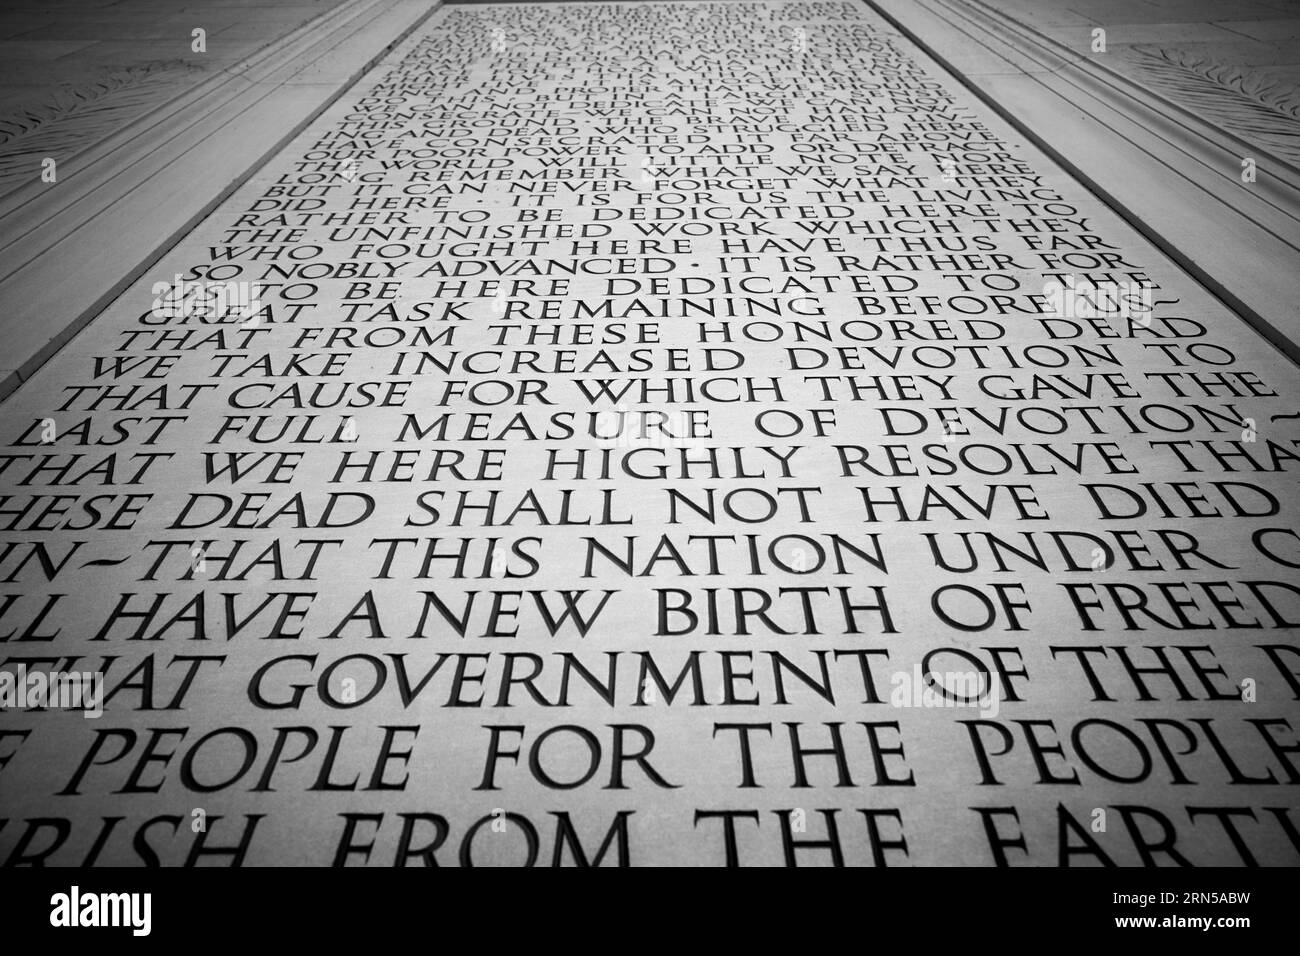 WASHINGTON, DC - The text of the Gettysburg Address by Abraham Lincoln etched into a wall inside the Lincoln Memorial in Washington DC. Lincoln delive Stock Photo